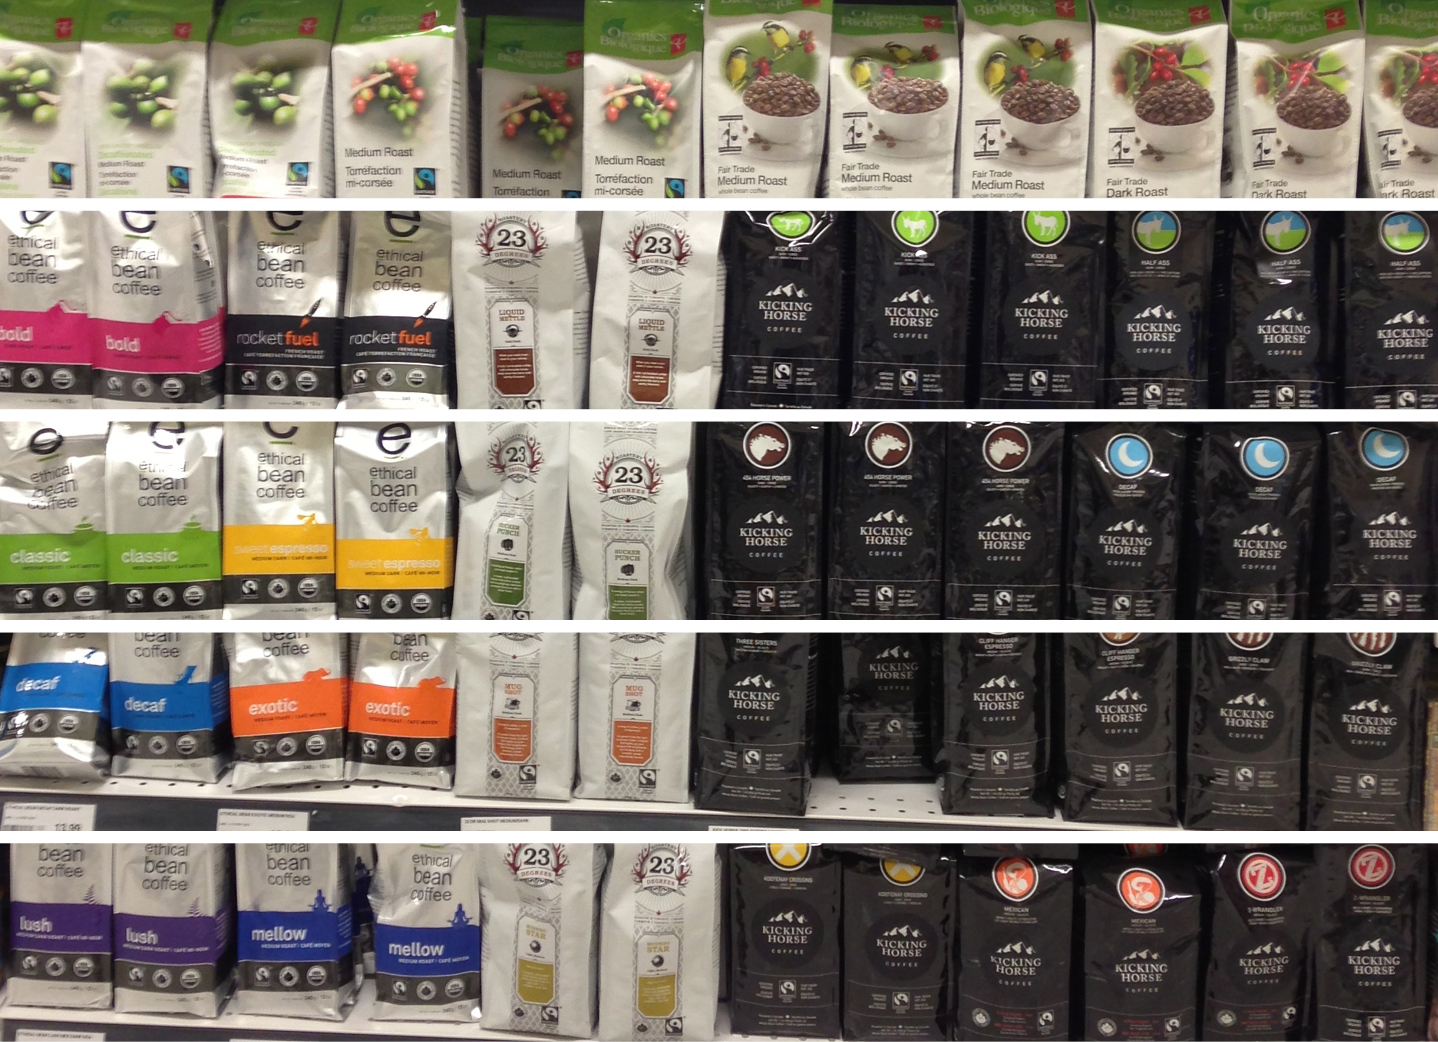 Supermarket shelves with coffee packages, showing more light-coloured bags.